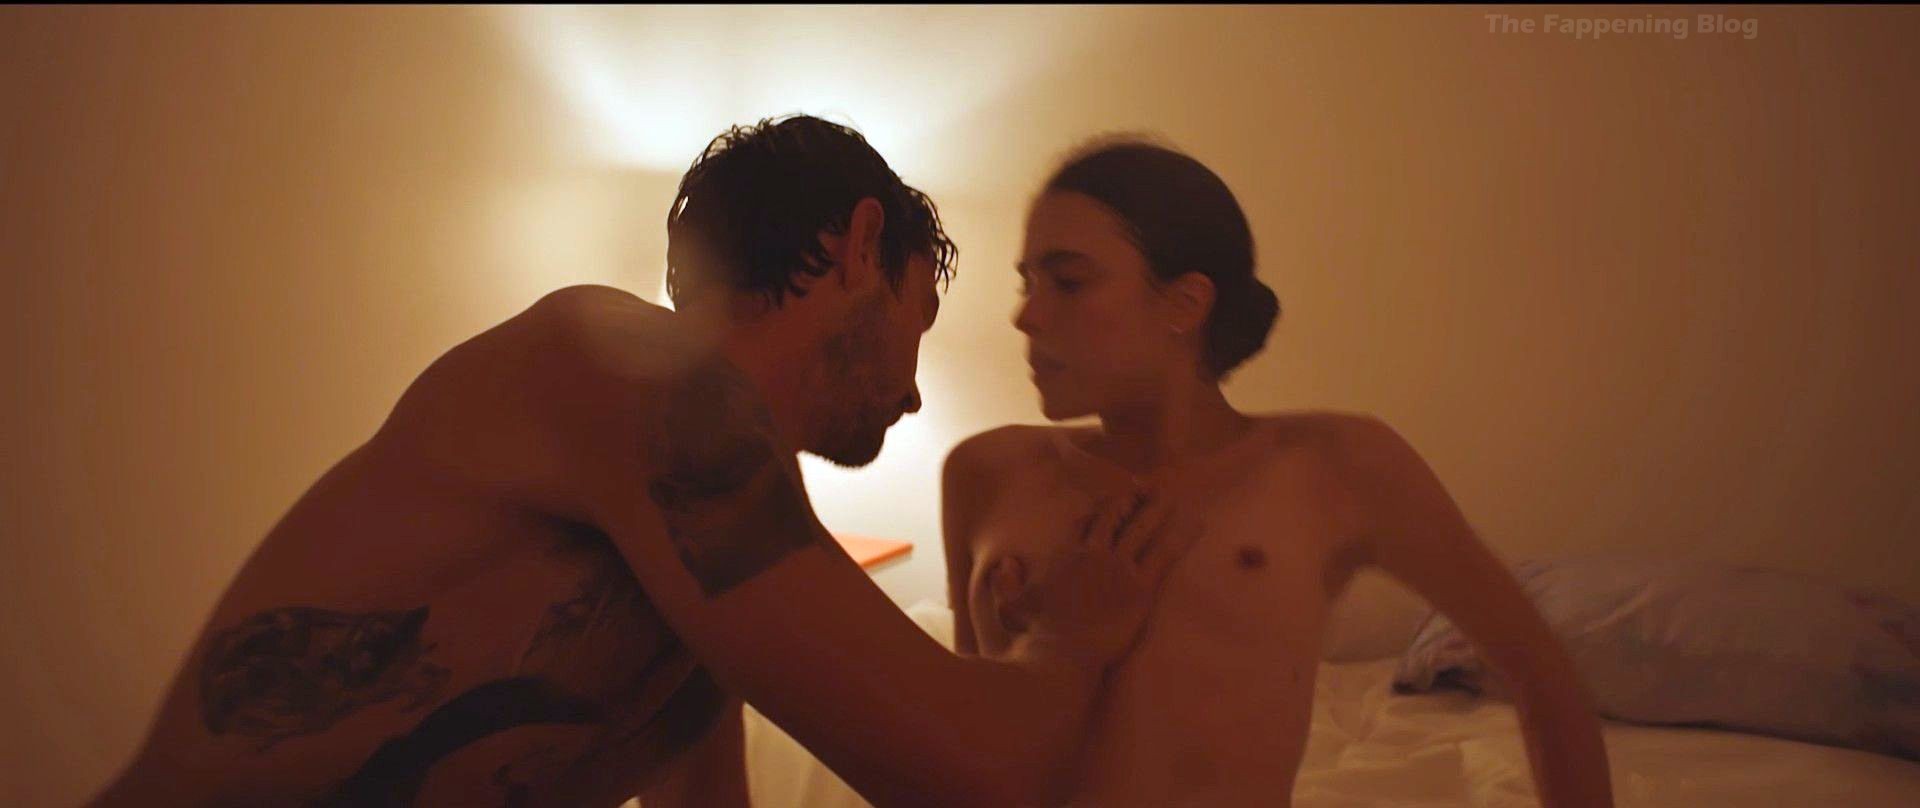 Watch Margaret Qualleyâ€™s nude video from the music video "Love Me Like...